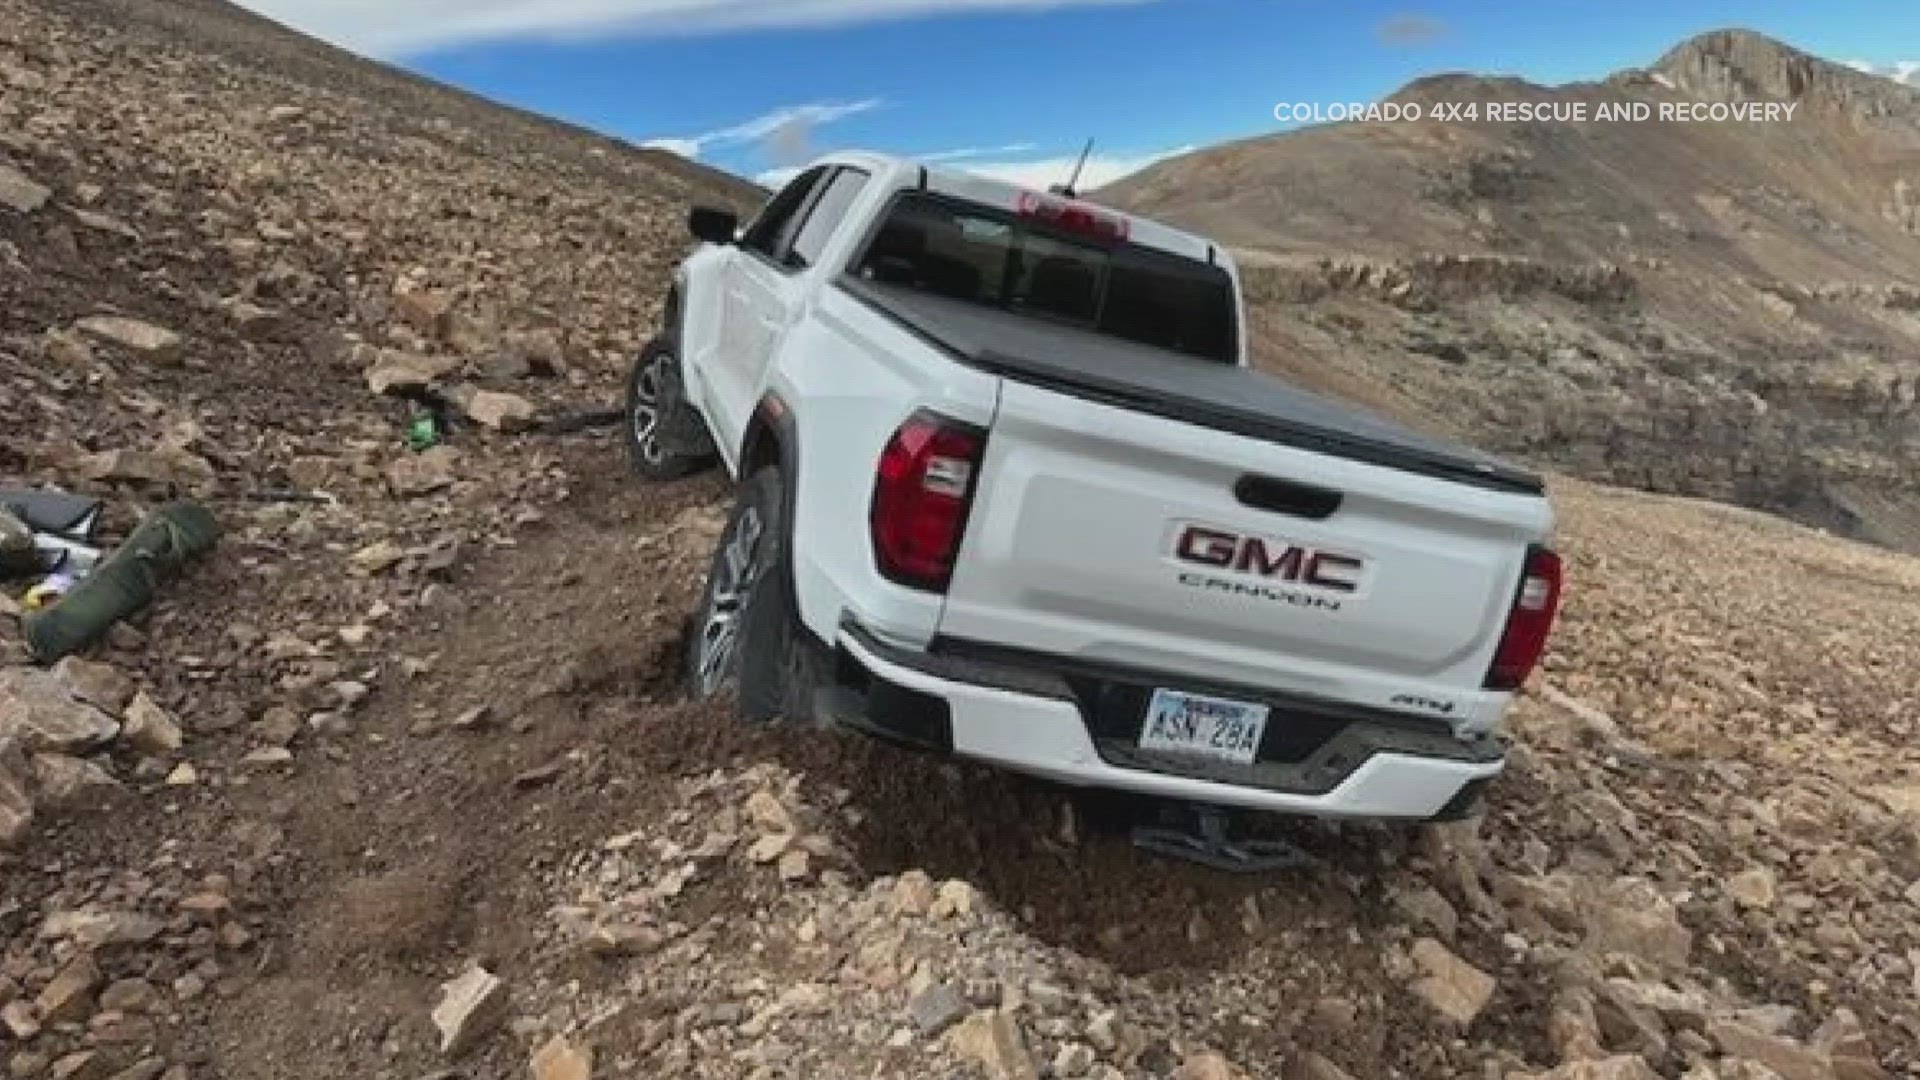 The truck got stuck when someone tried to drive it to the top of Park County 14er Mount Lincoln late last month.